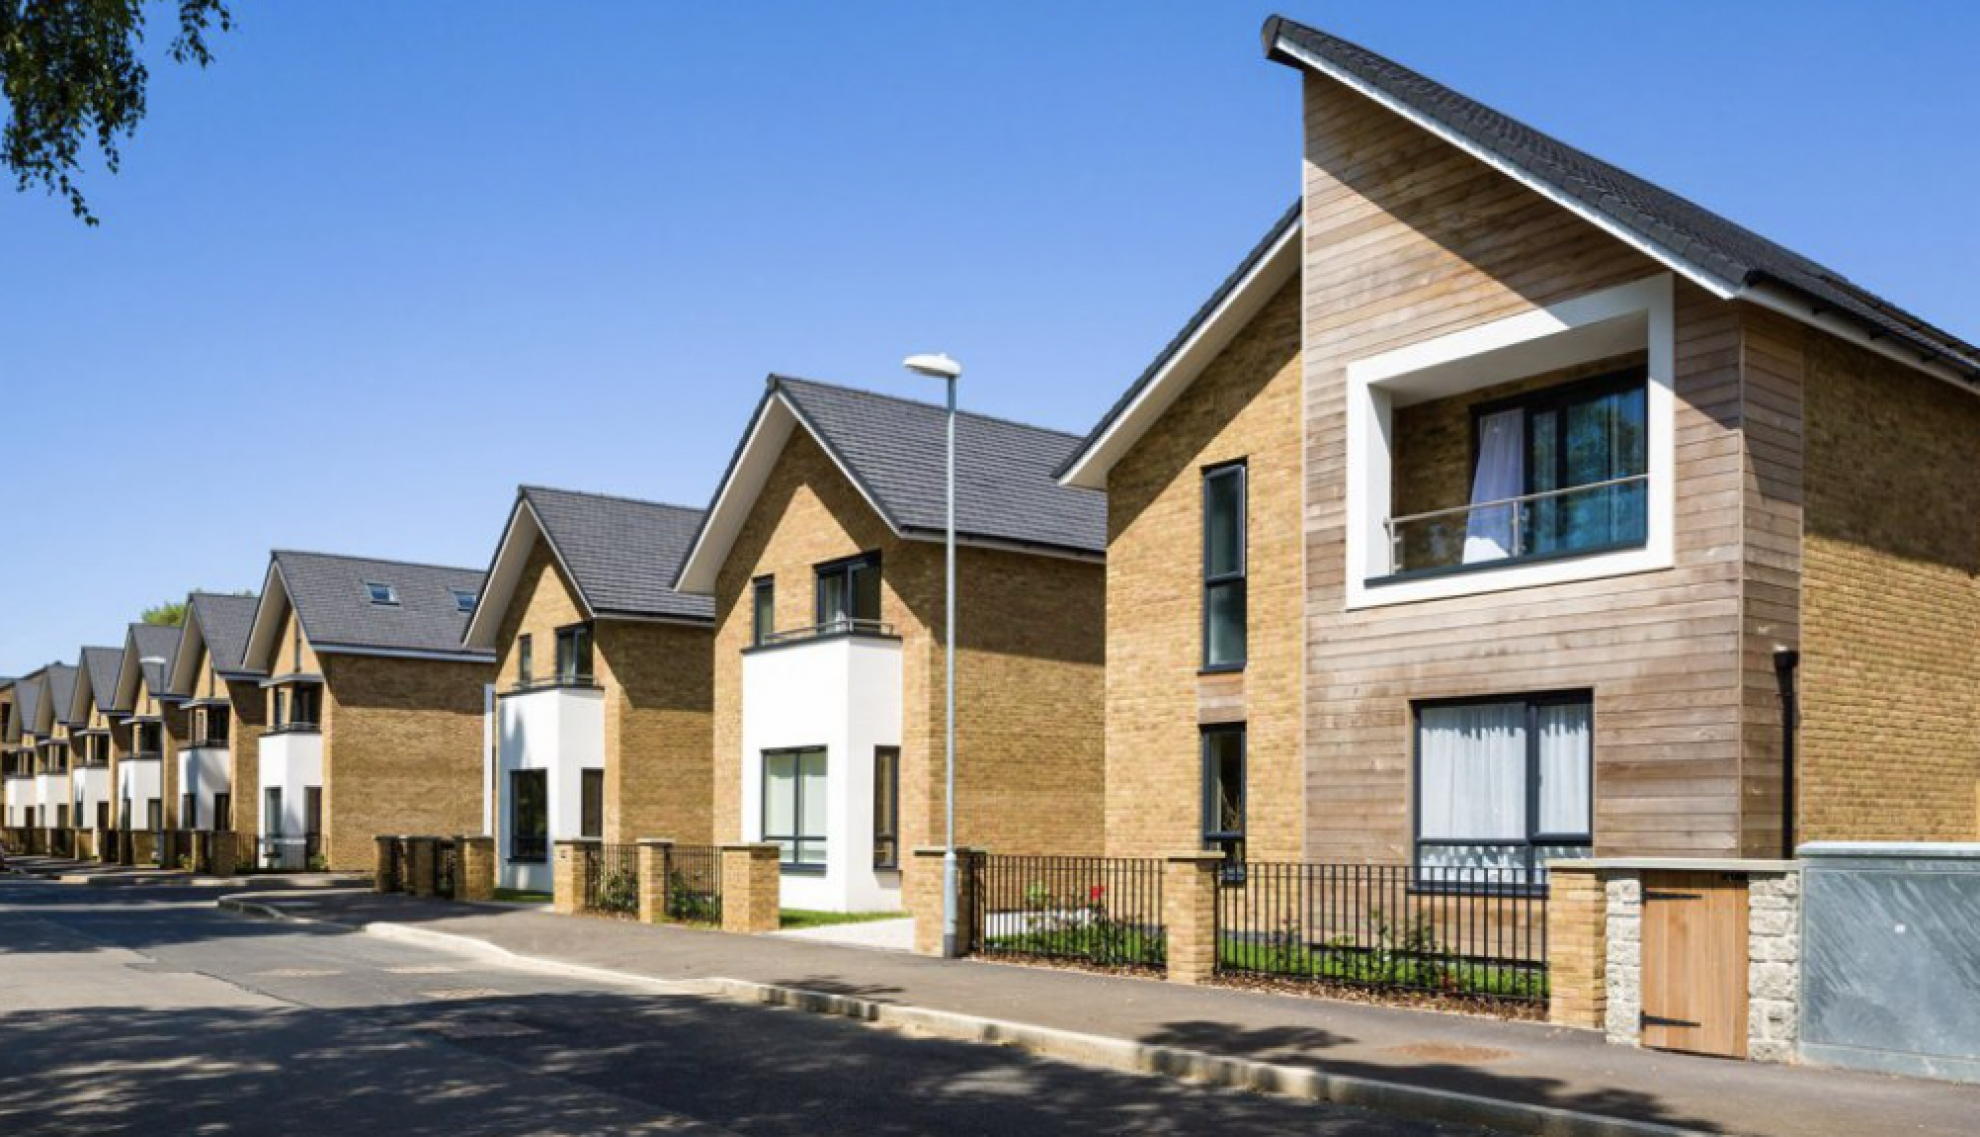 New build homes at Locking Parklands in the South West of England